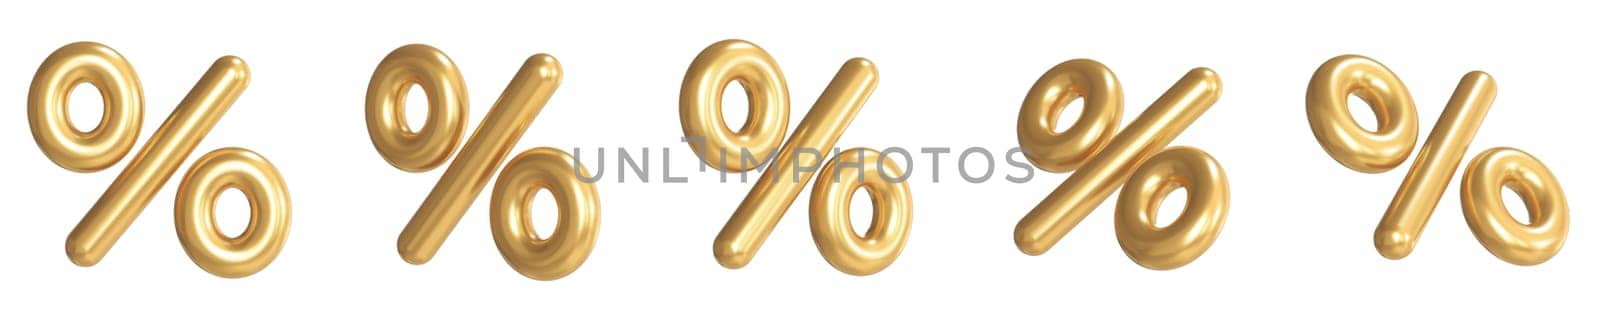 Set of golden percent signs different angles 3D rendering illustration isolated on white background